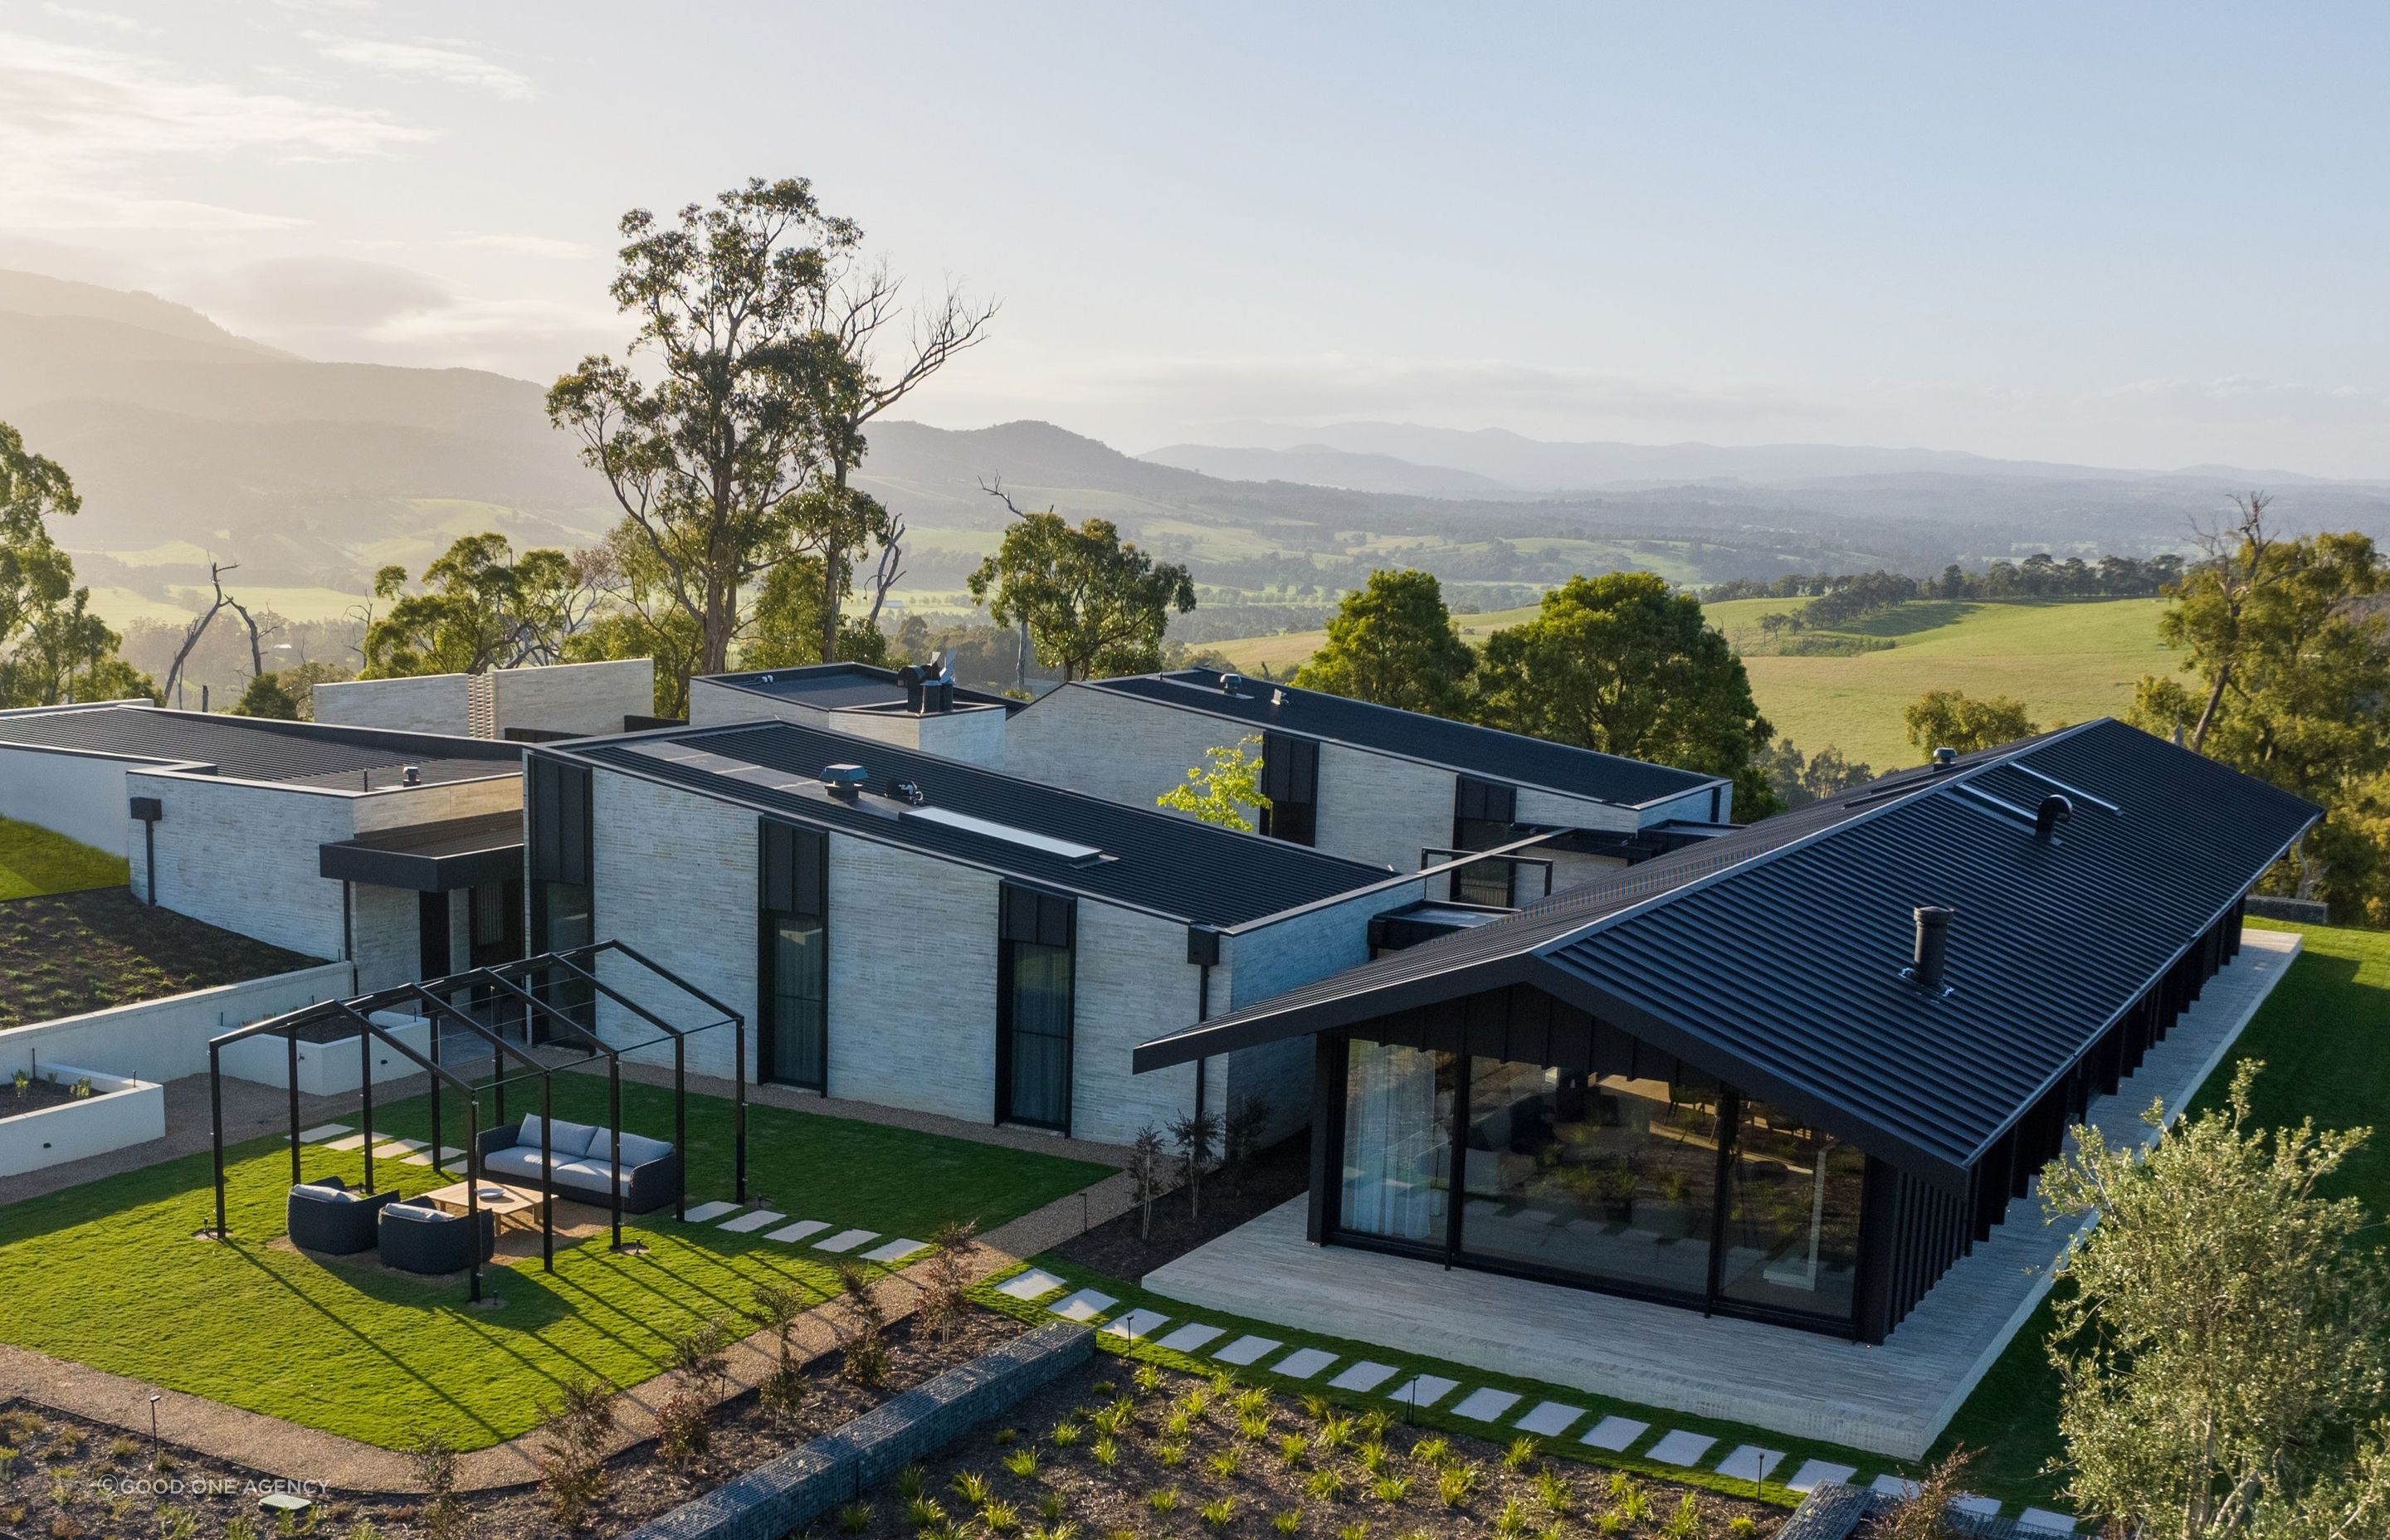 'Hilltop Hood's' roofline mirrors the ranges behind the home